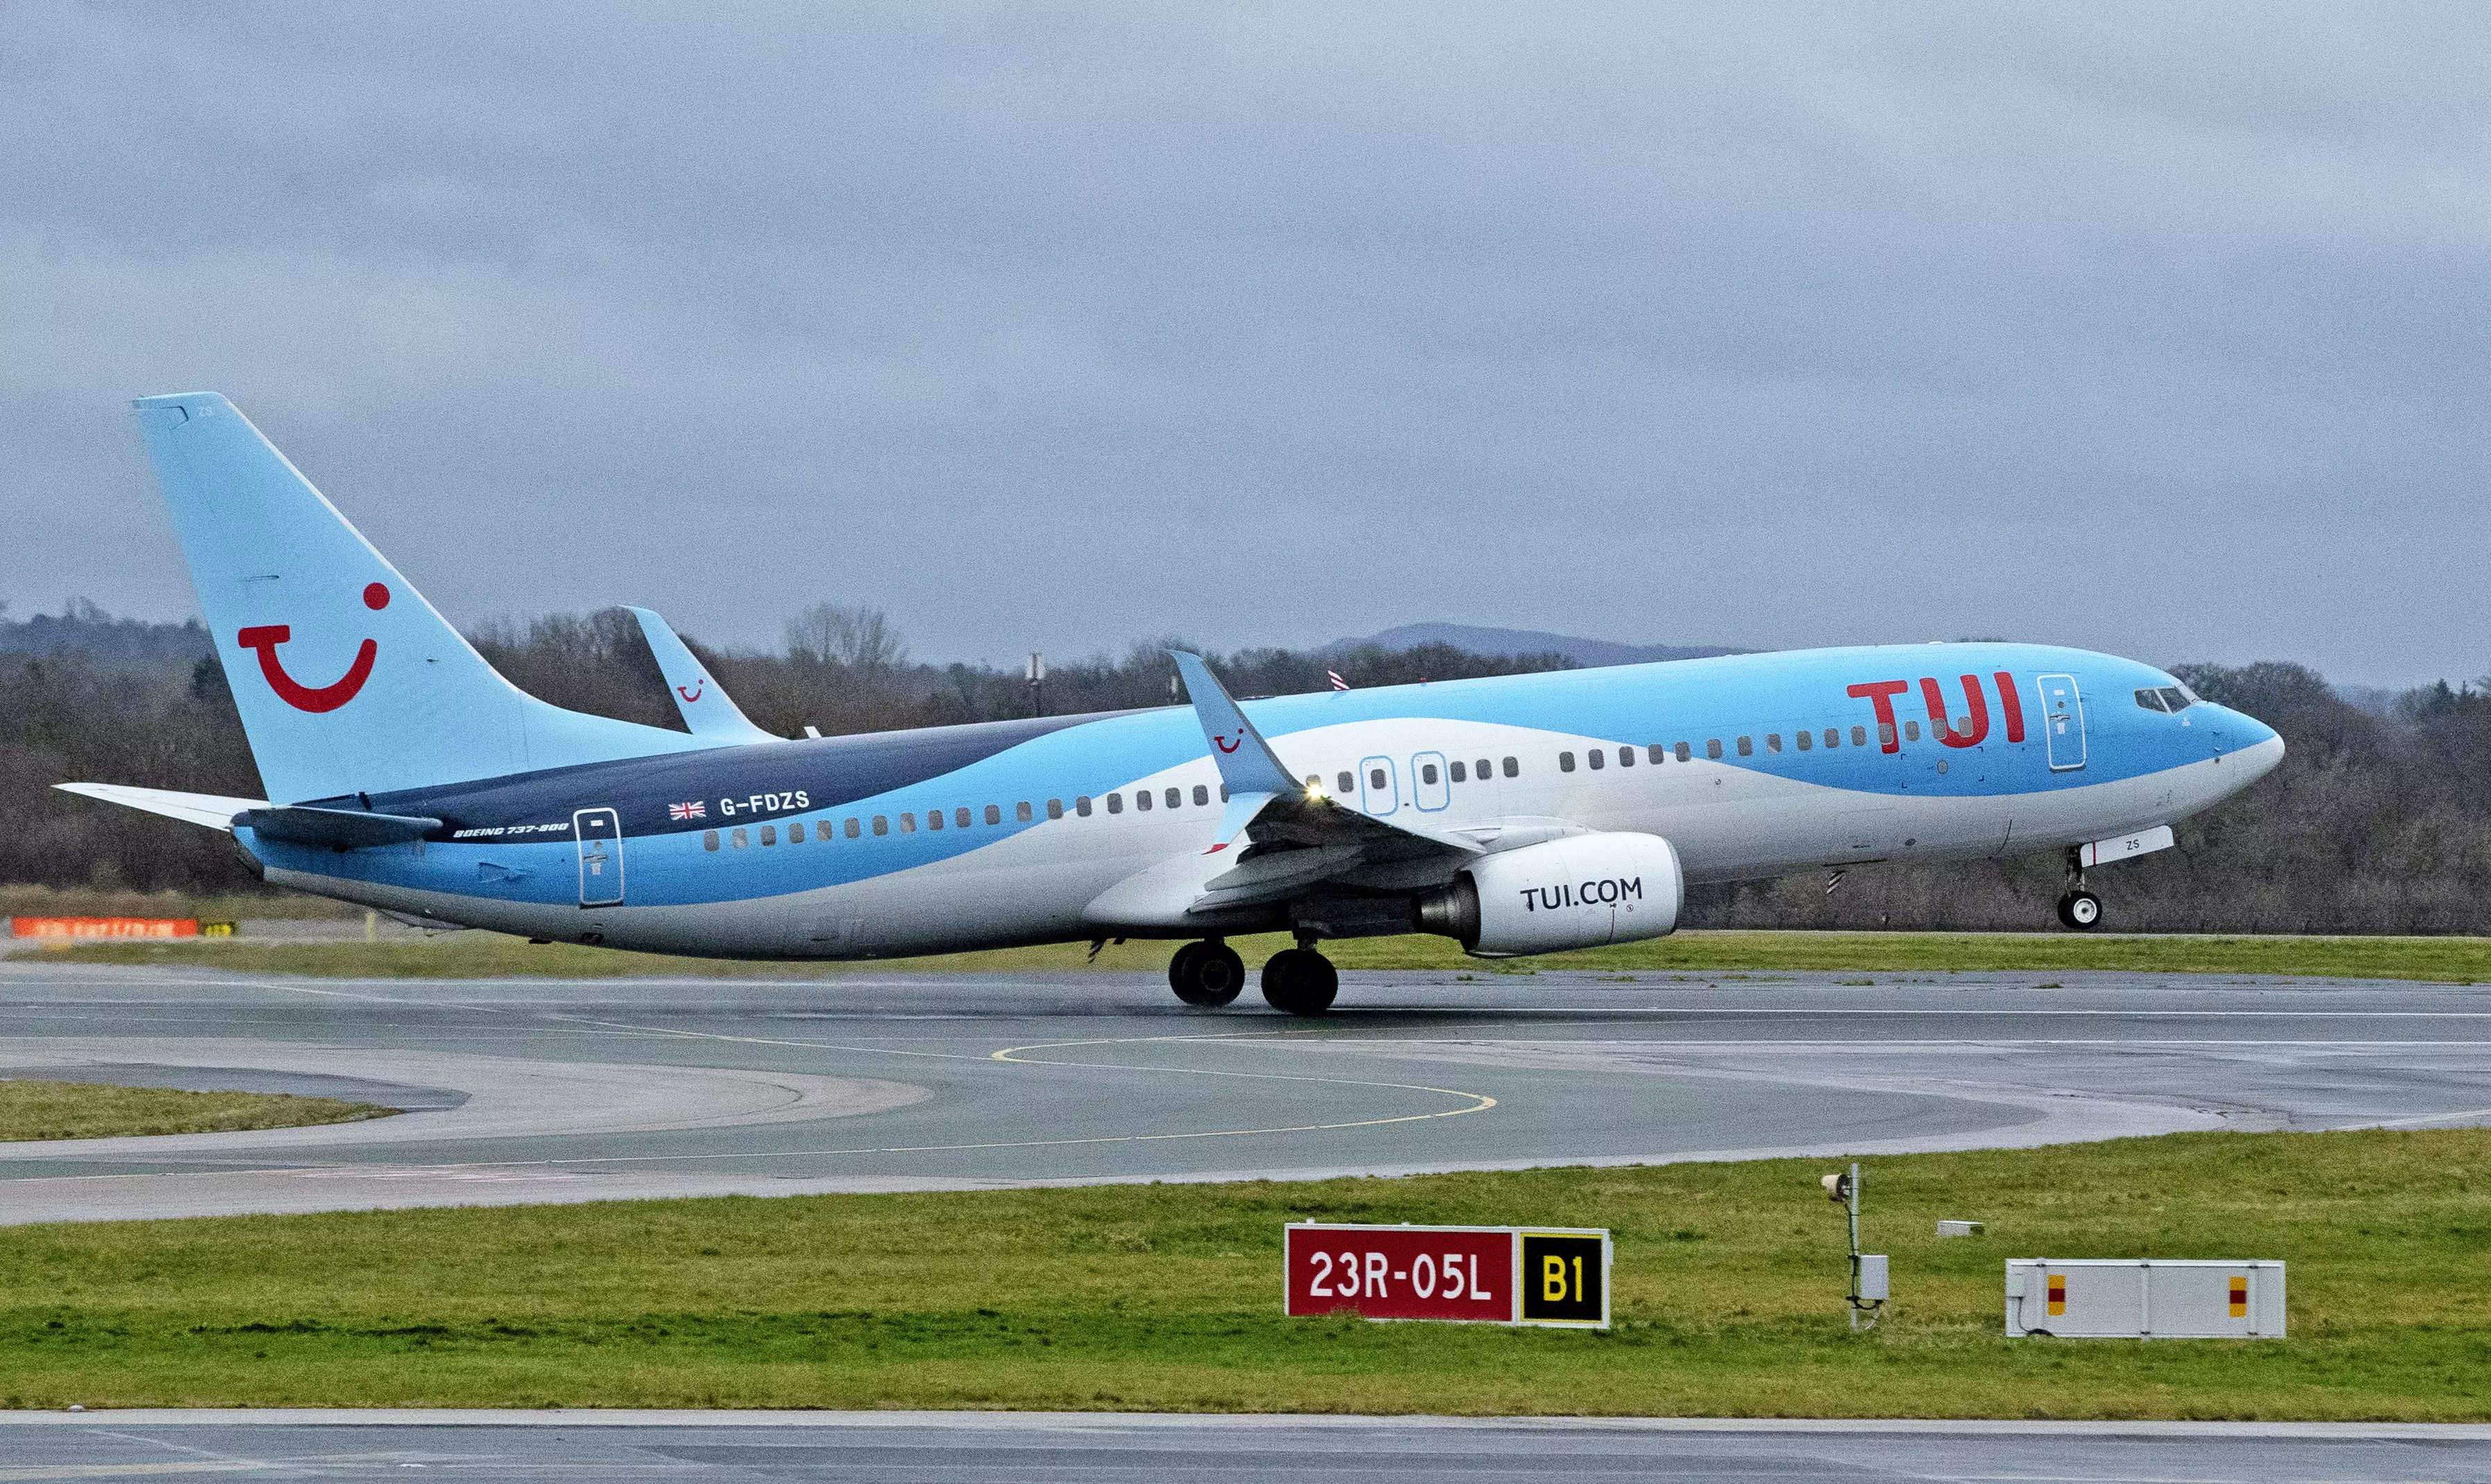 TUI has also reported a rise in sales.